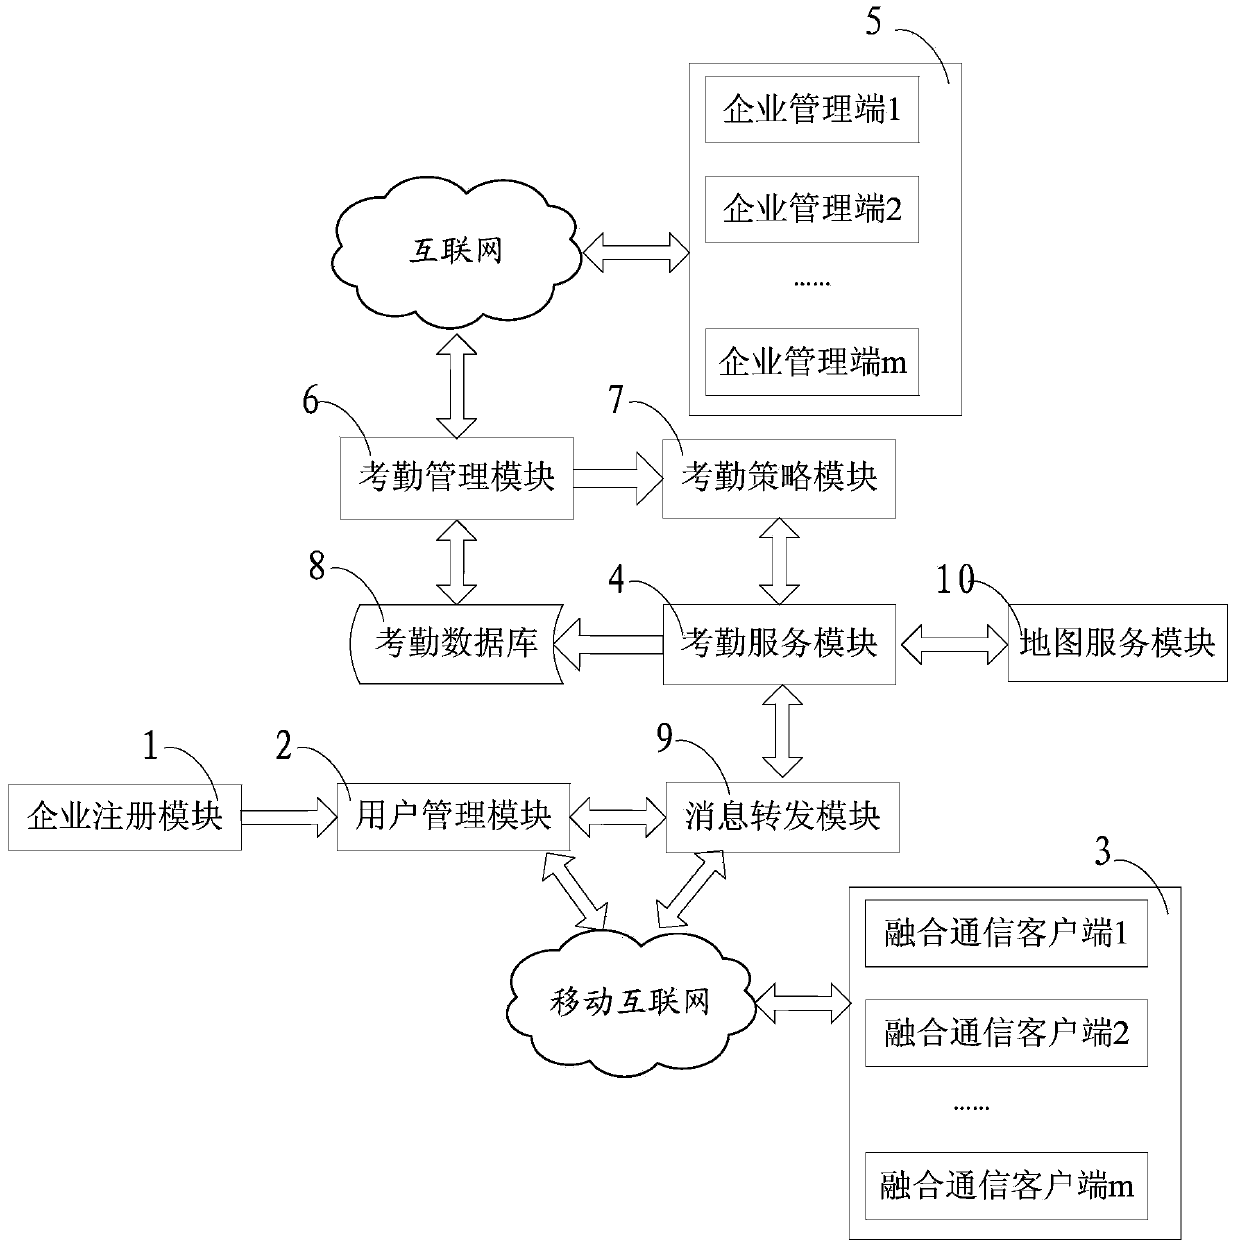 Multi-enterprise attendance method and system implemented based on converged communication technology